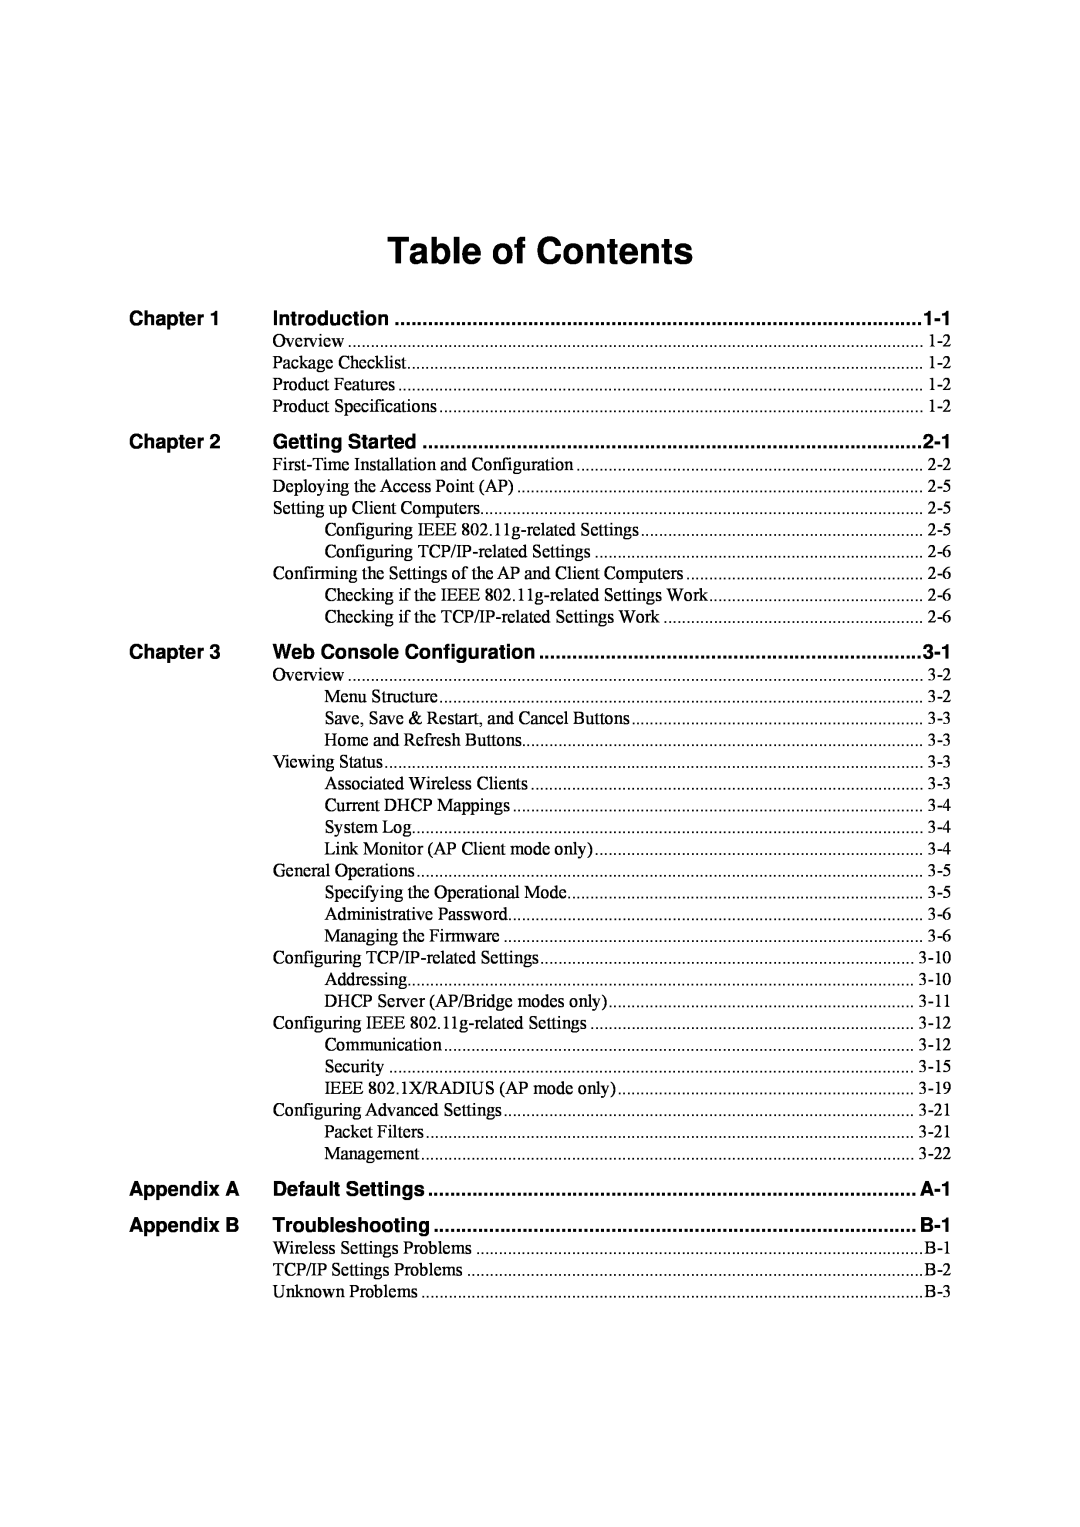 National Instruments WAP-3711, WAP-3701 user manual Table of Contents 